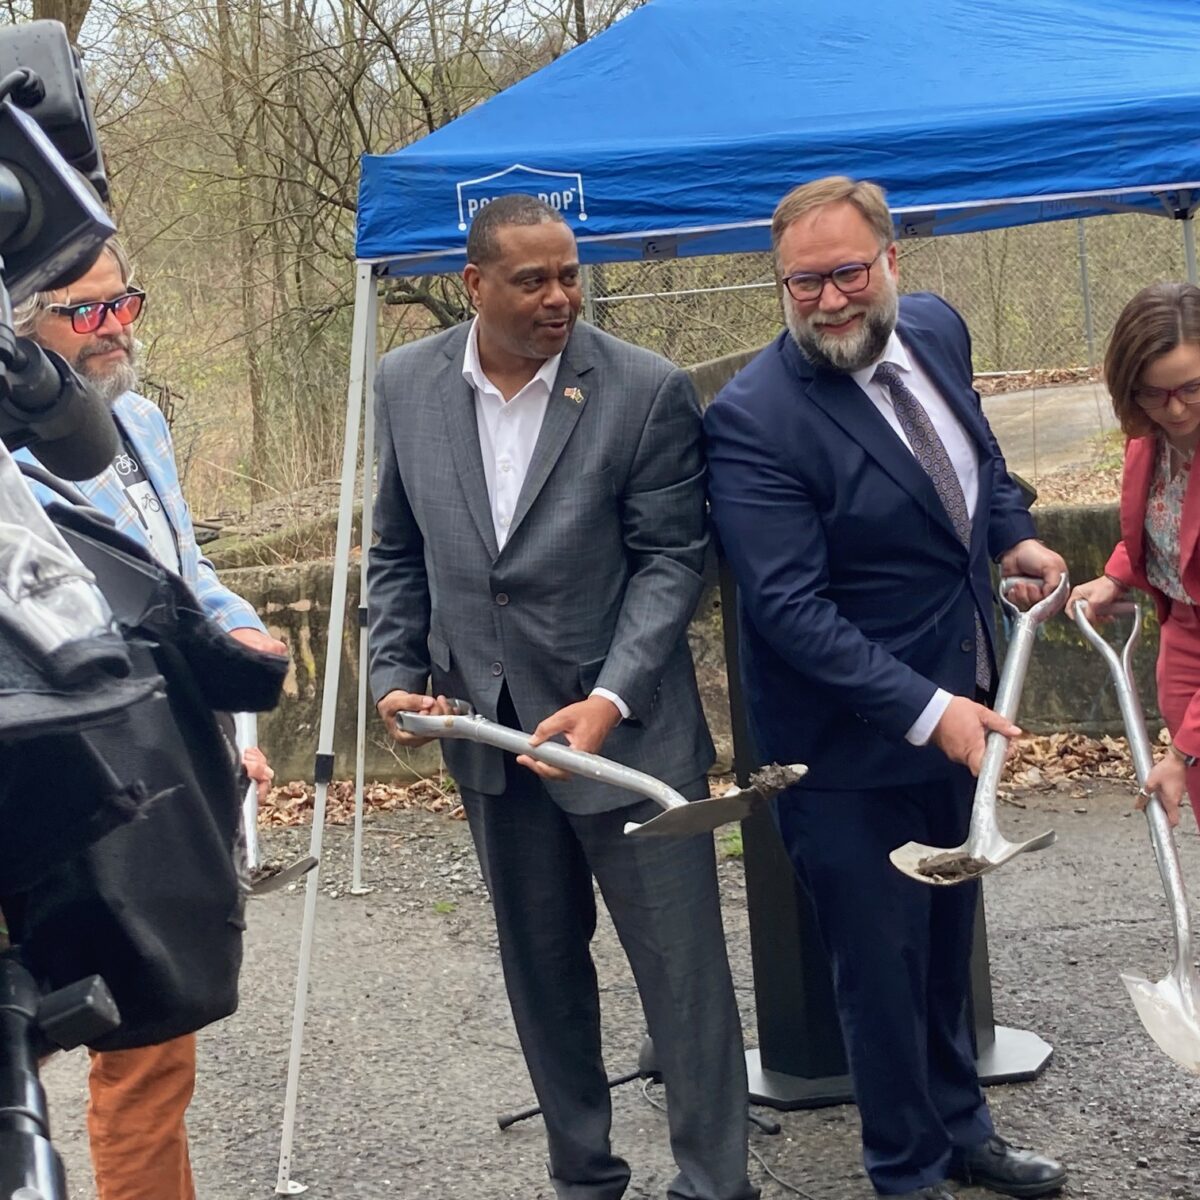 Walking connection: Pittsburgh begins work on pedestrian bridge to reconnect Brighton Heights to Riverview Park